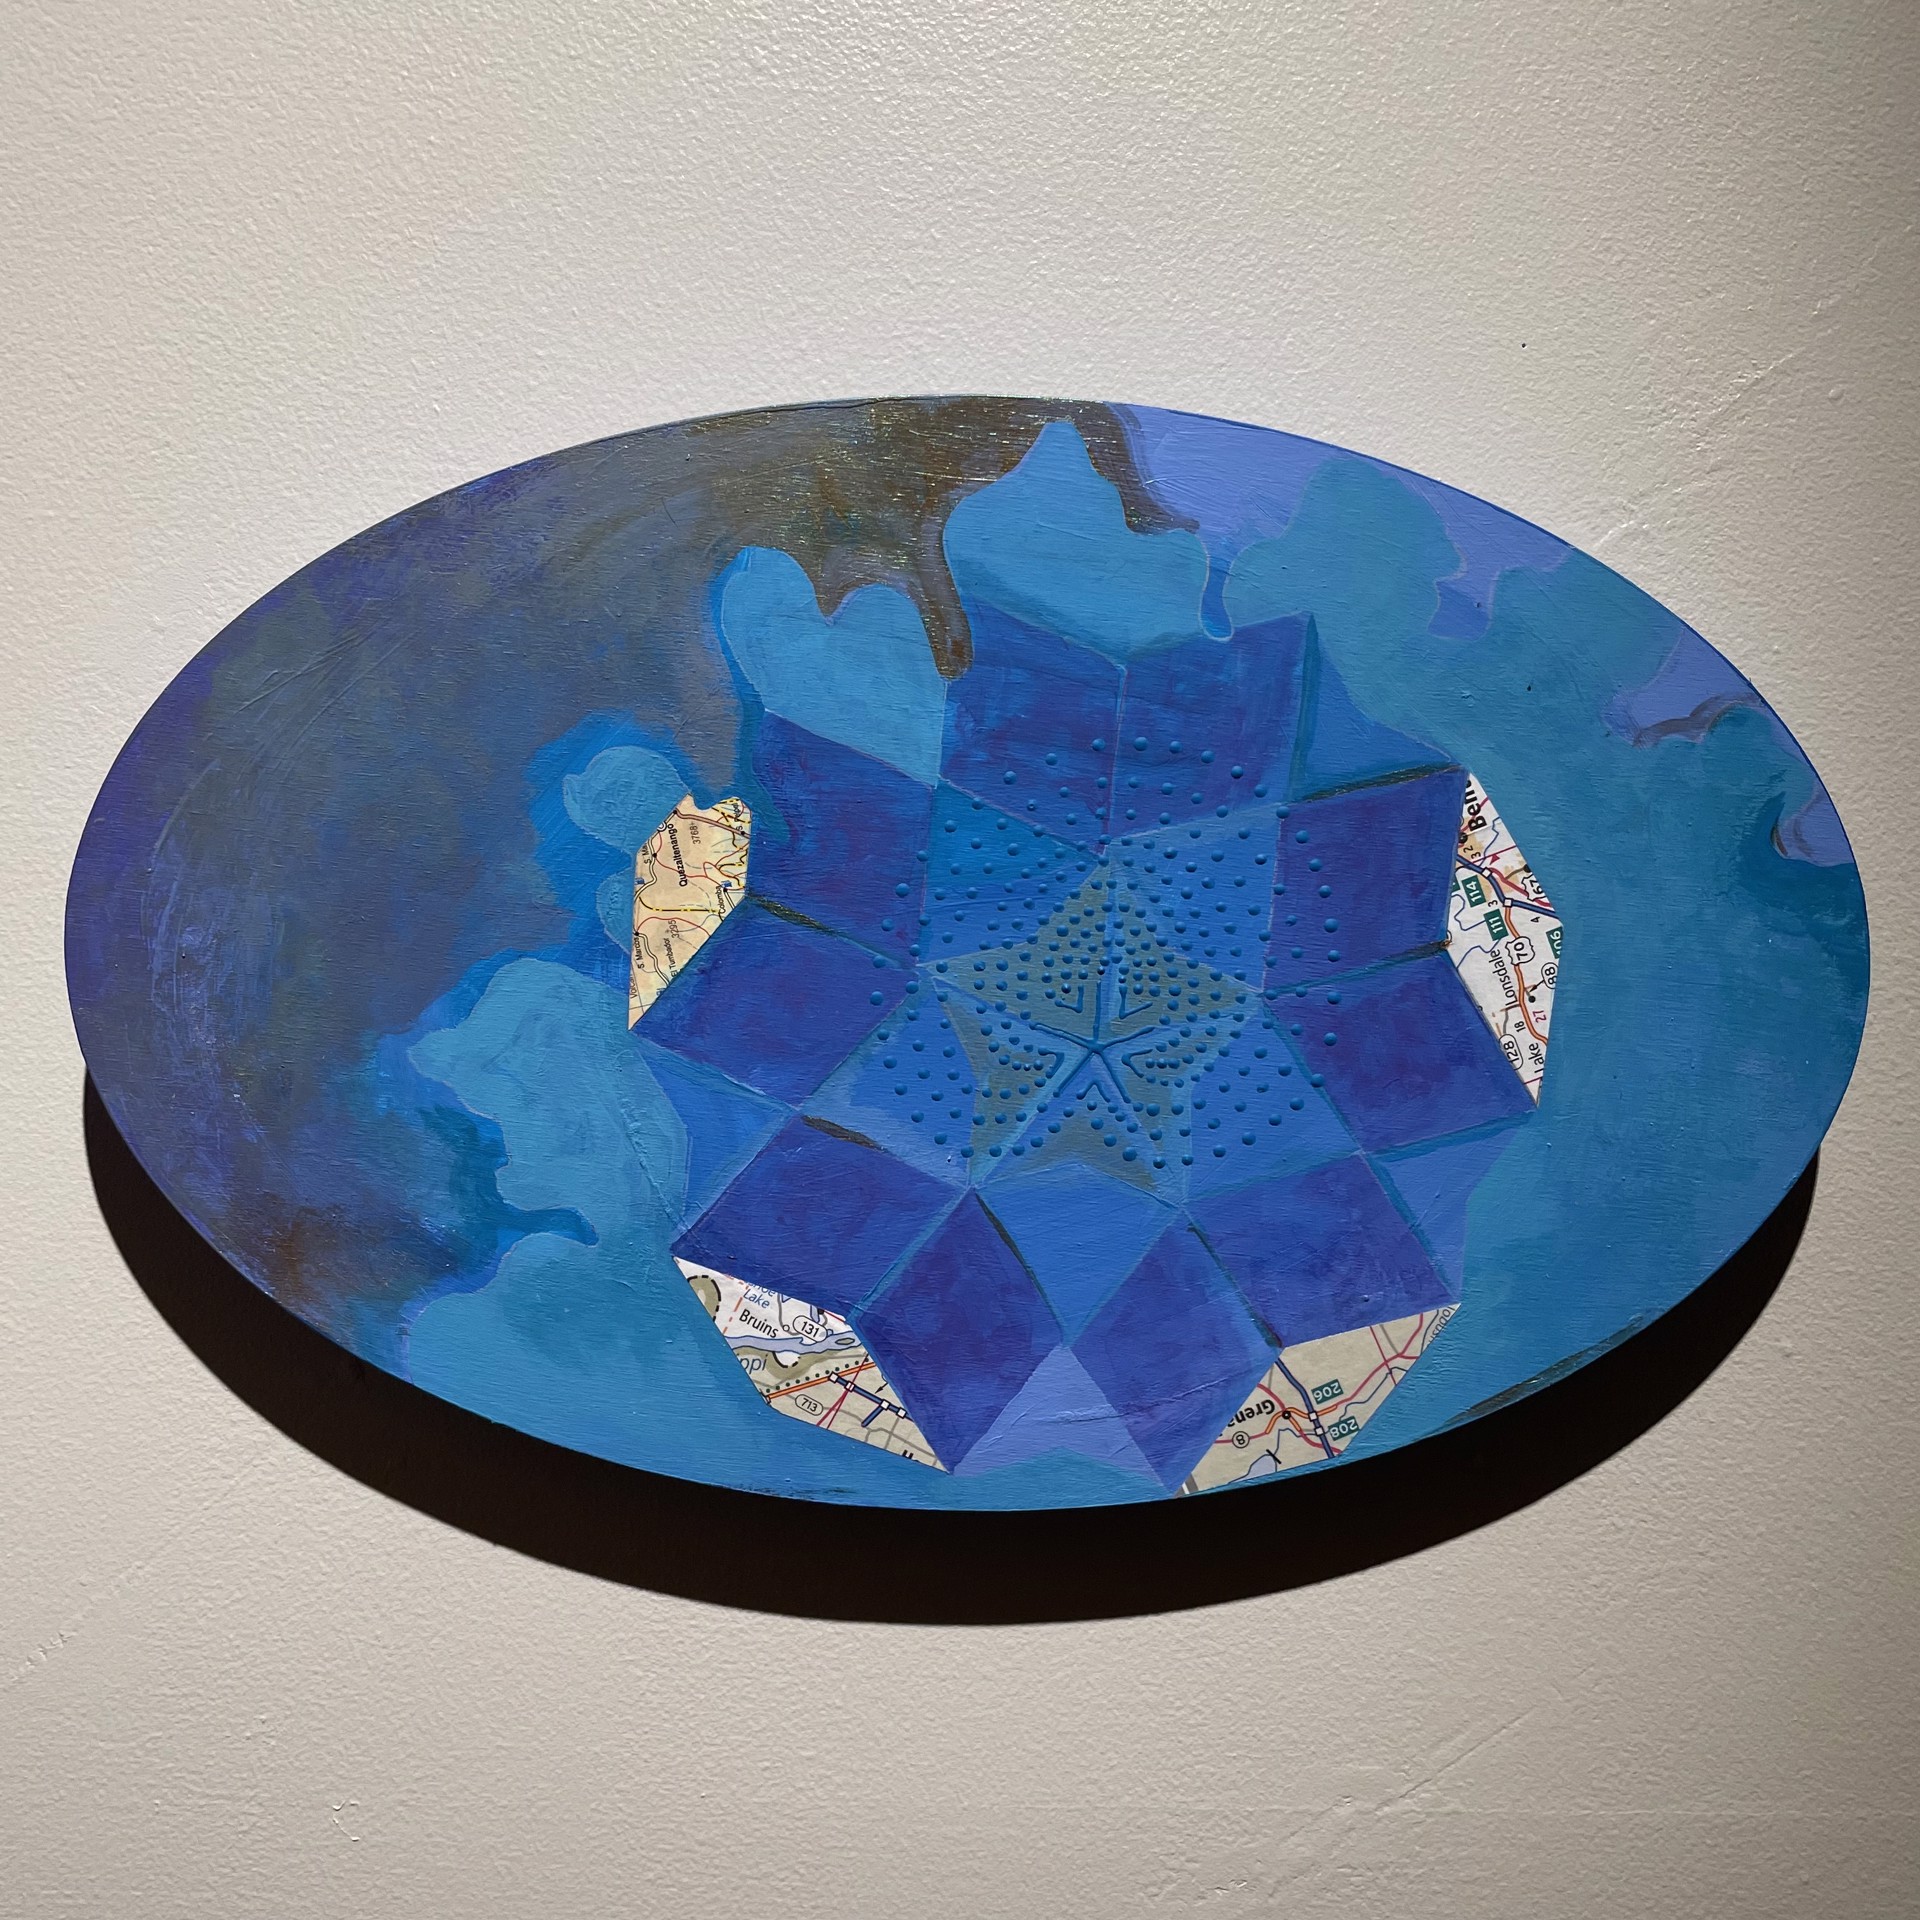 The Mystery of Place (small blue geometry oval) by Jacqueline May